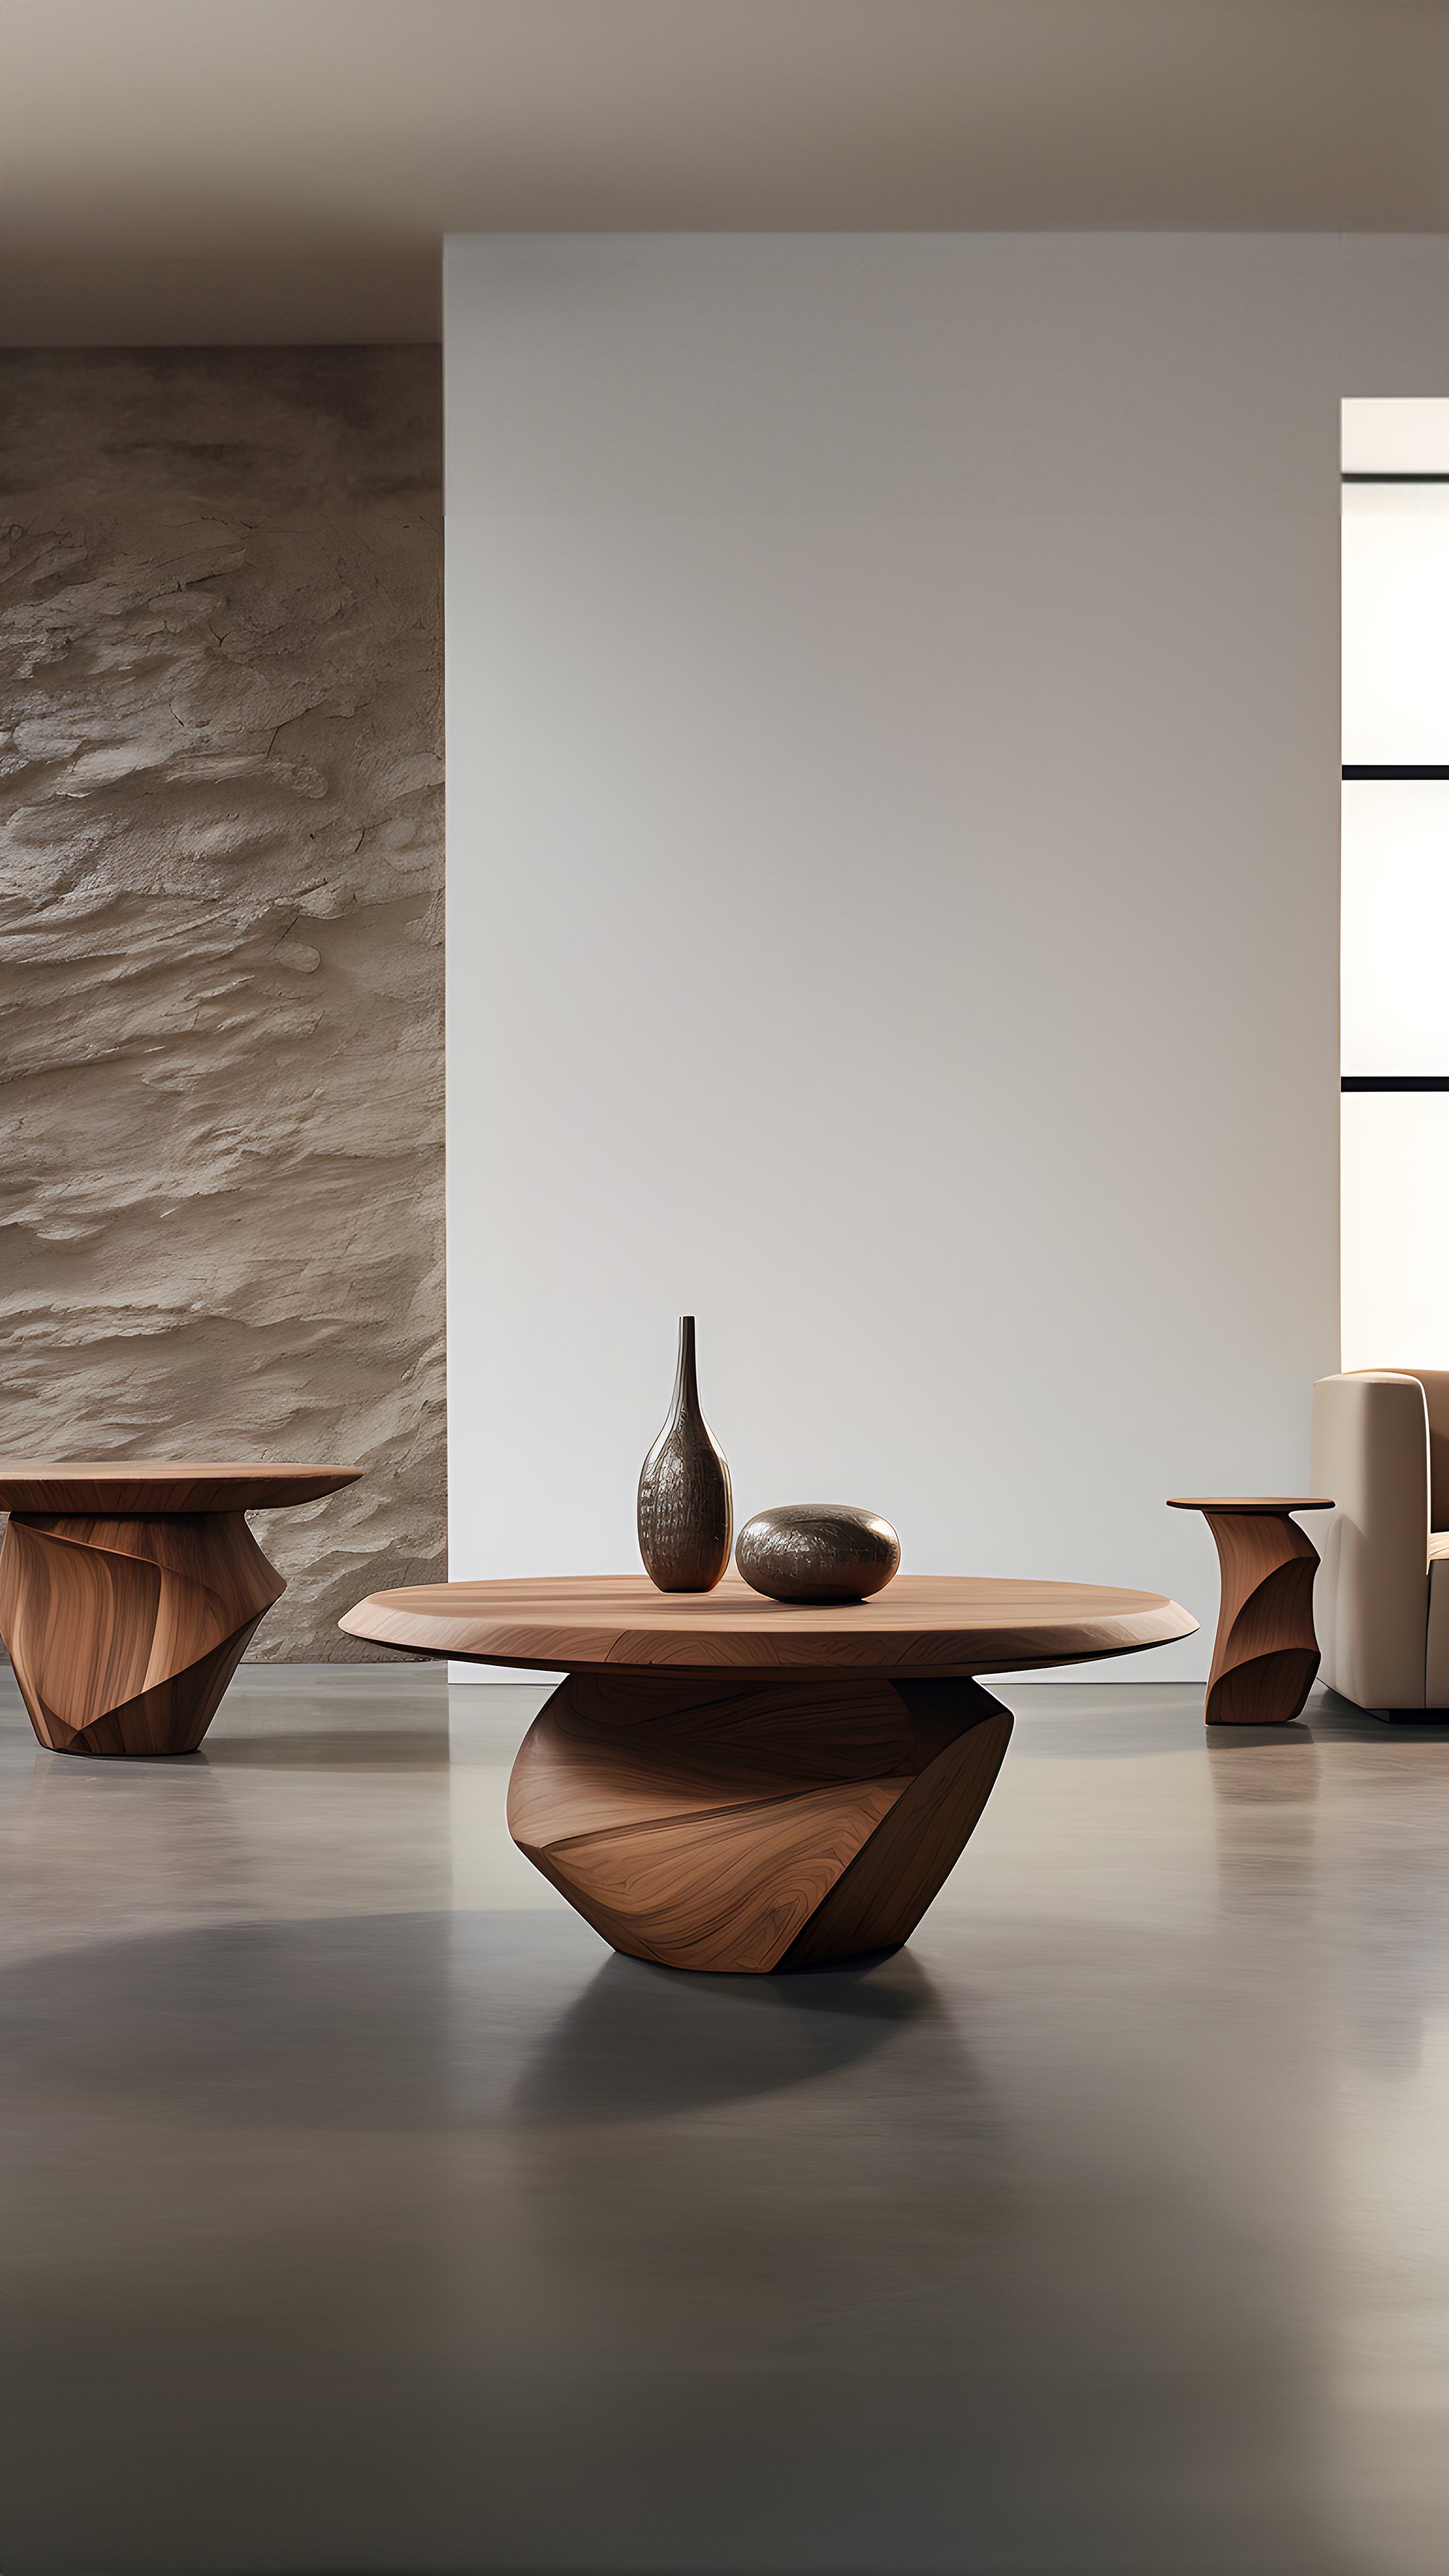 Sculptural Coffee Table Made of Solid Wood, Center Table Solace S37 by Joel Escalona — 7.jpg